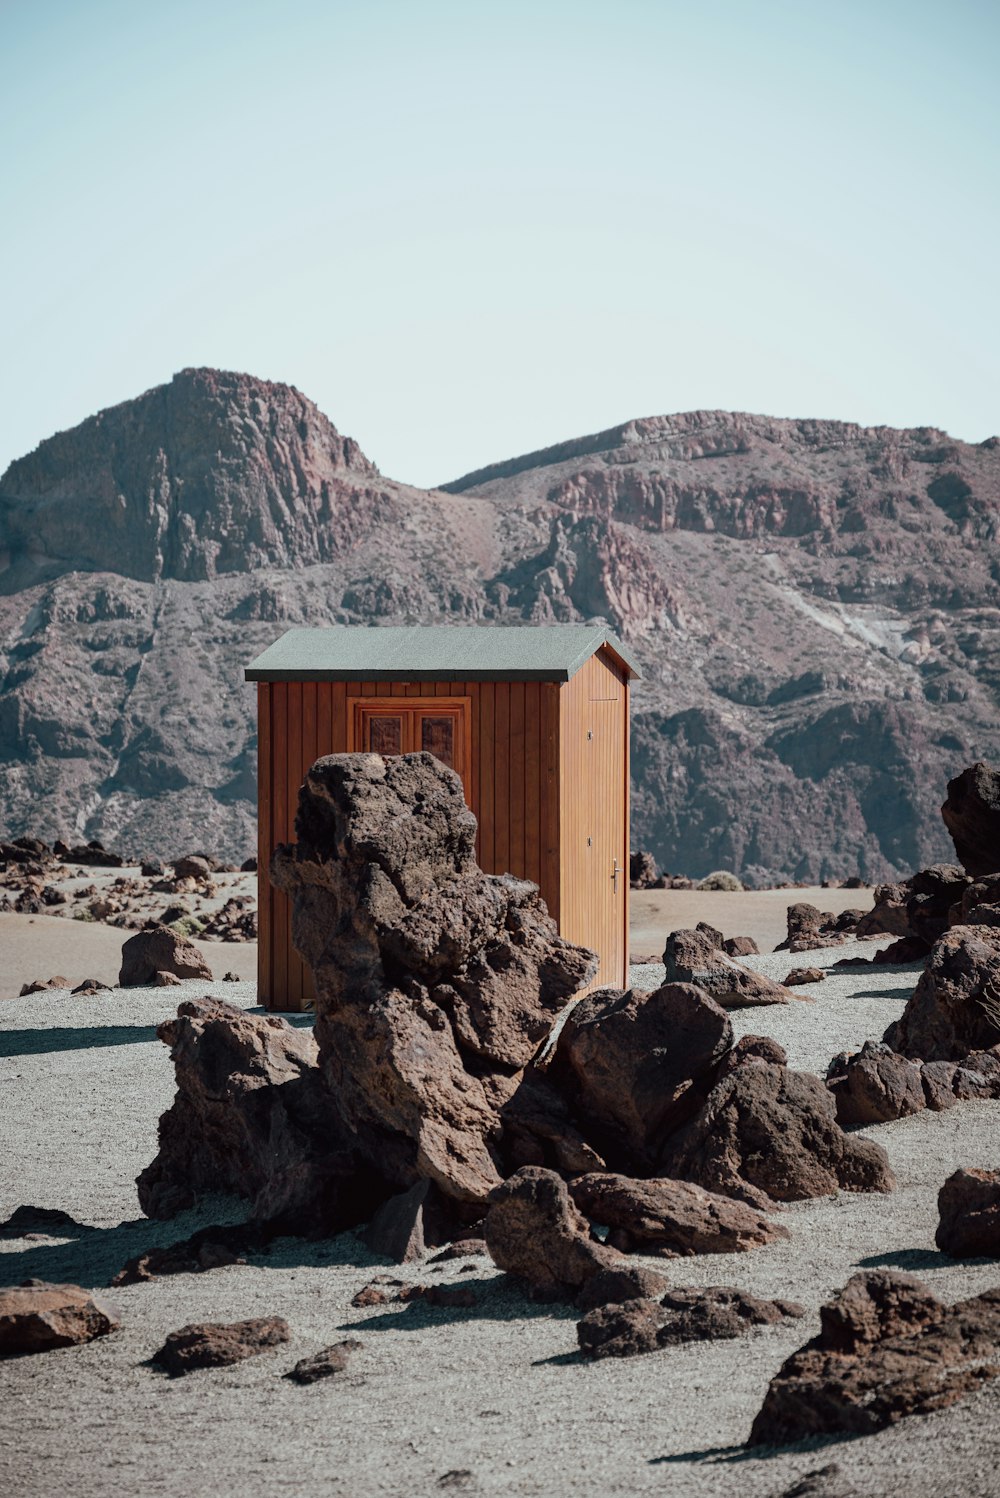 a small outhouse in the middle of a desert